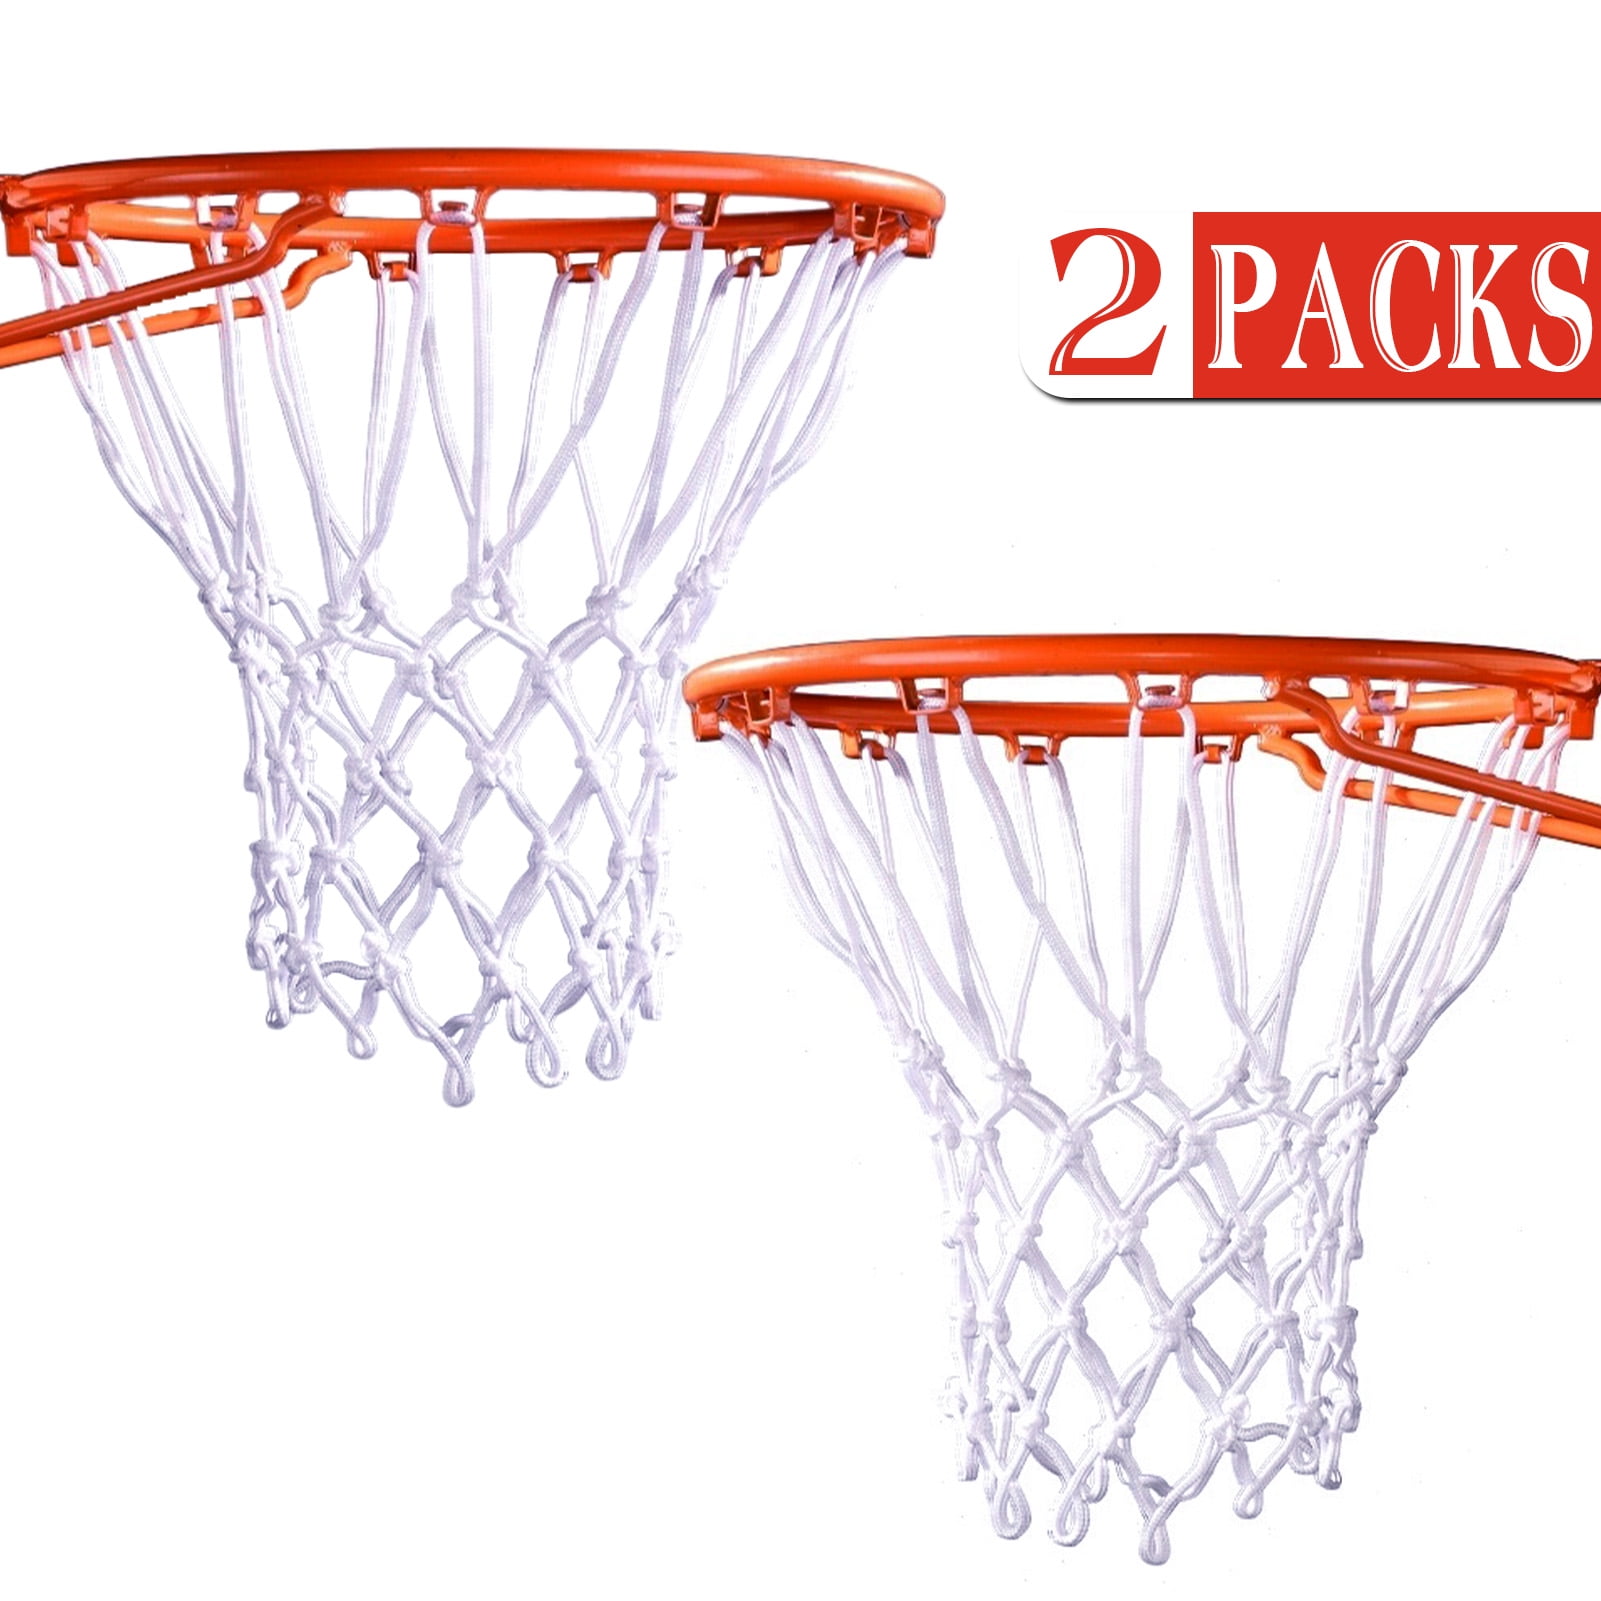 2 Packs Mini Basketball Net Replacement Nylon Little Tikes Basketball Net  Sports Basketball Hoop Net Outdoor Indoor Anti Whip Basketball Net for Kids  Activity Supplies 8 Loops White